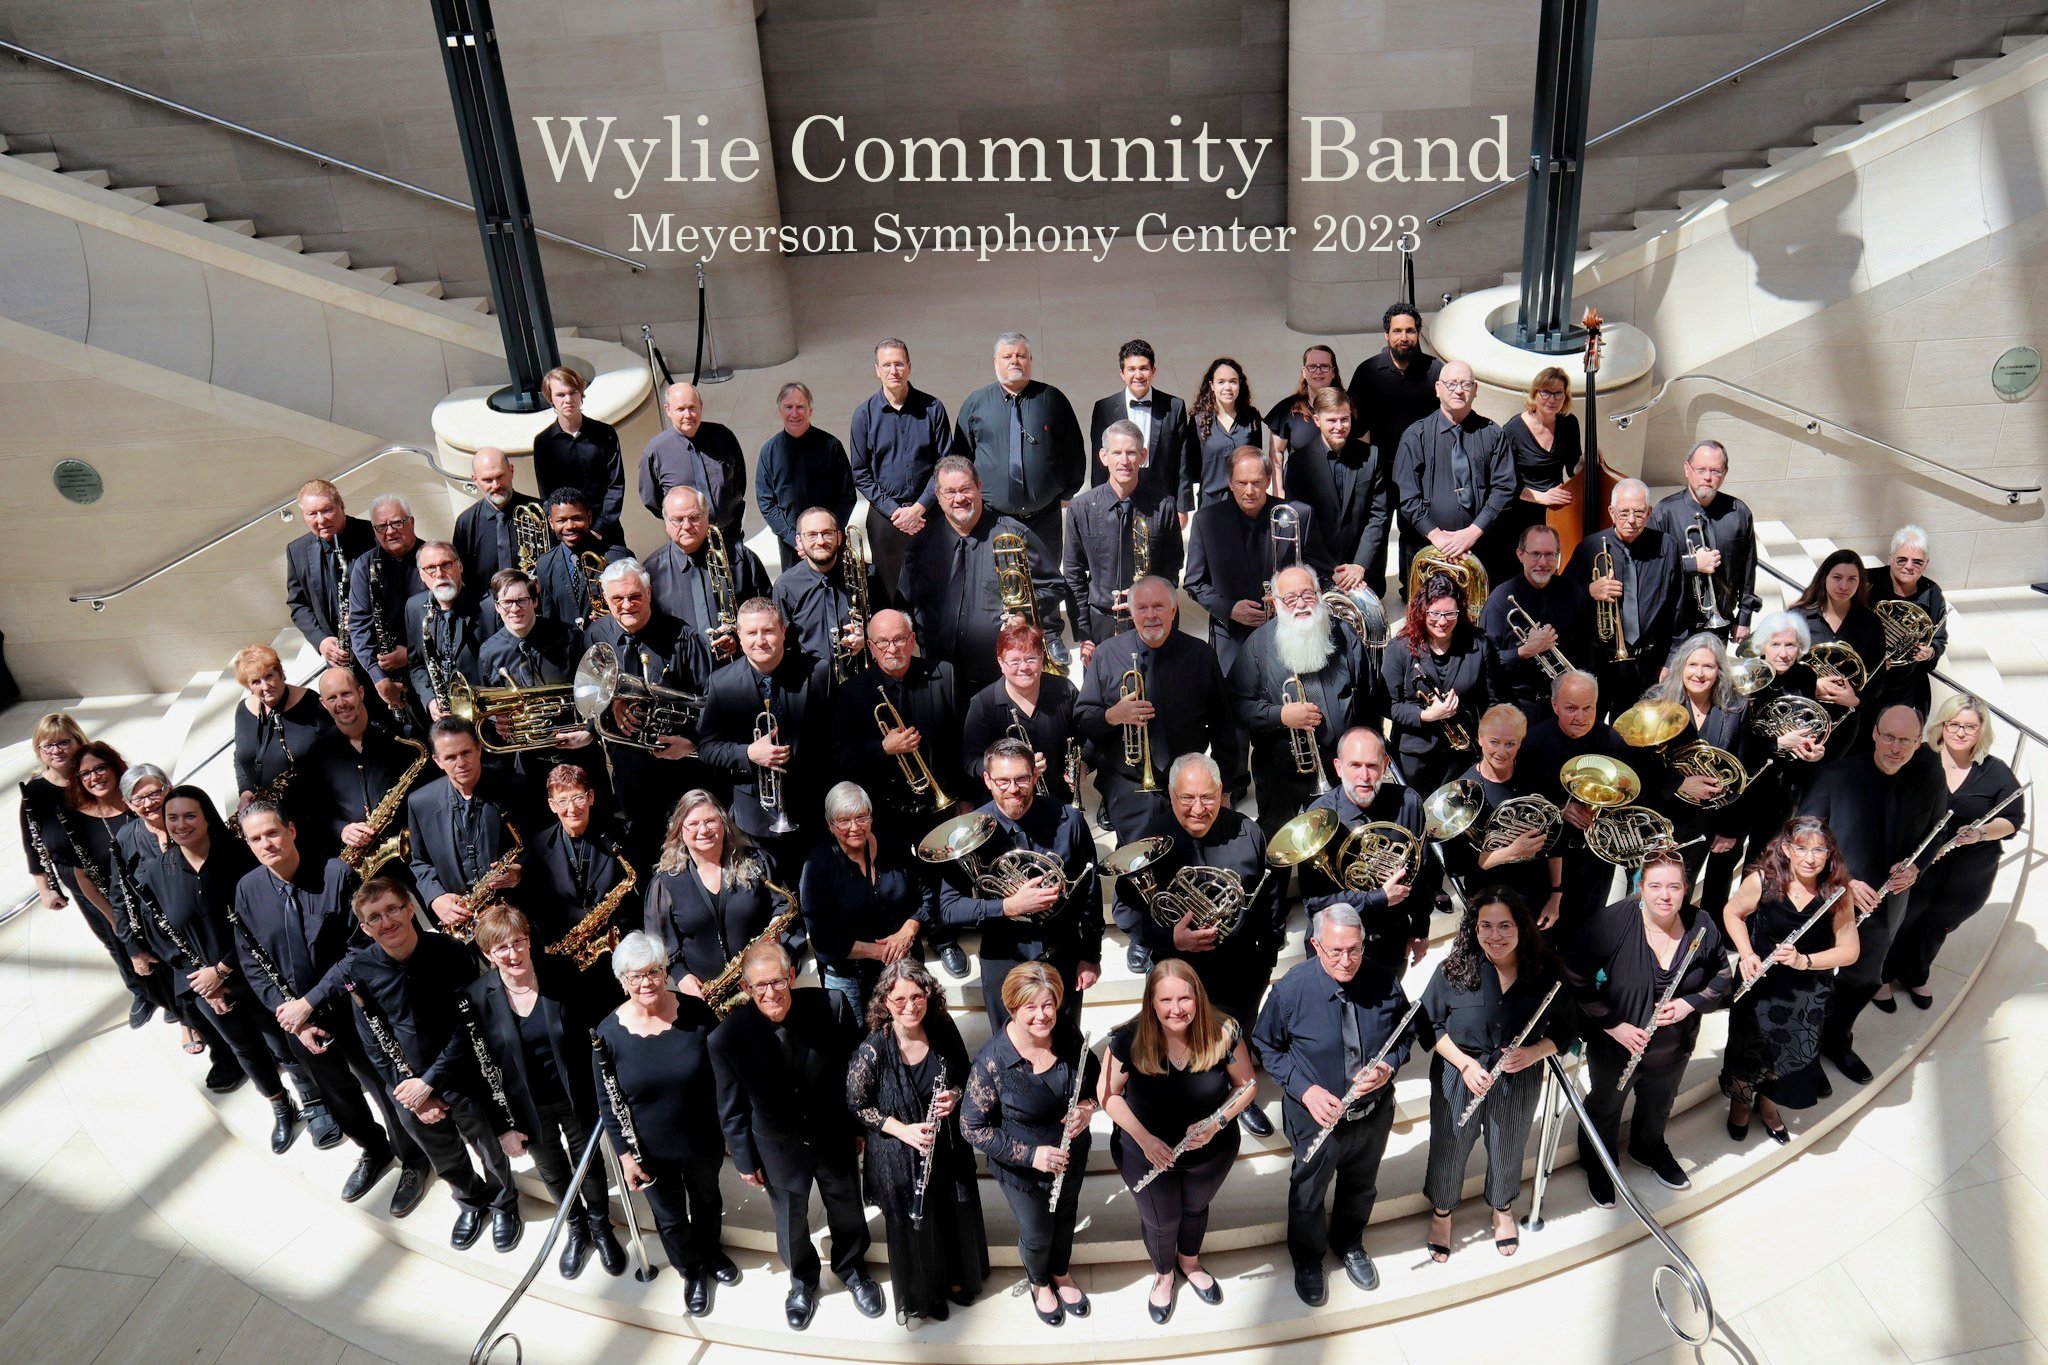 Wylie Community Band at the Meyerson 2023